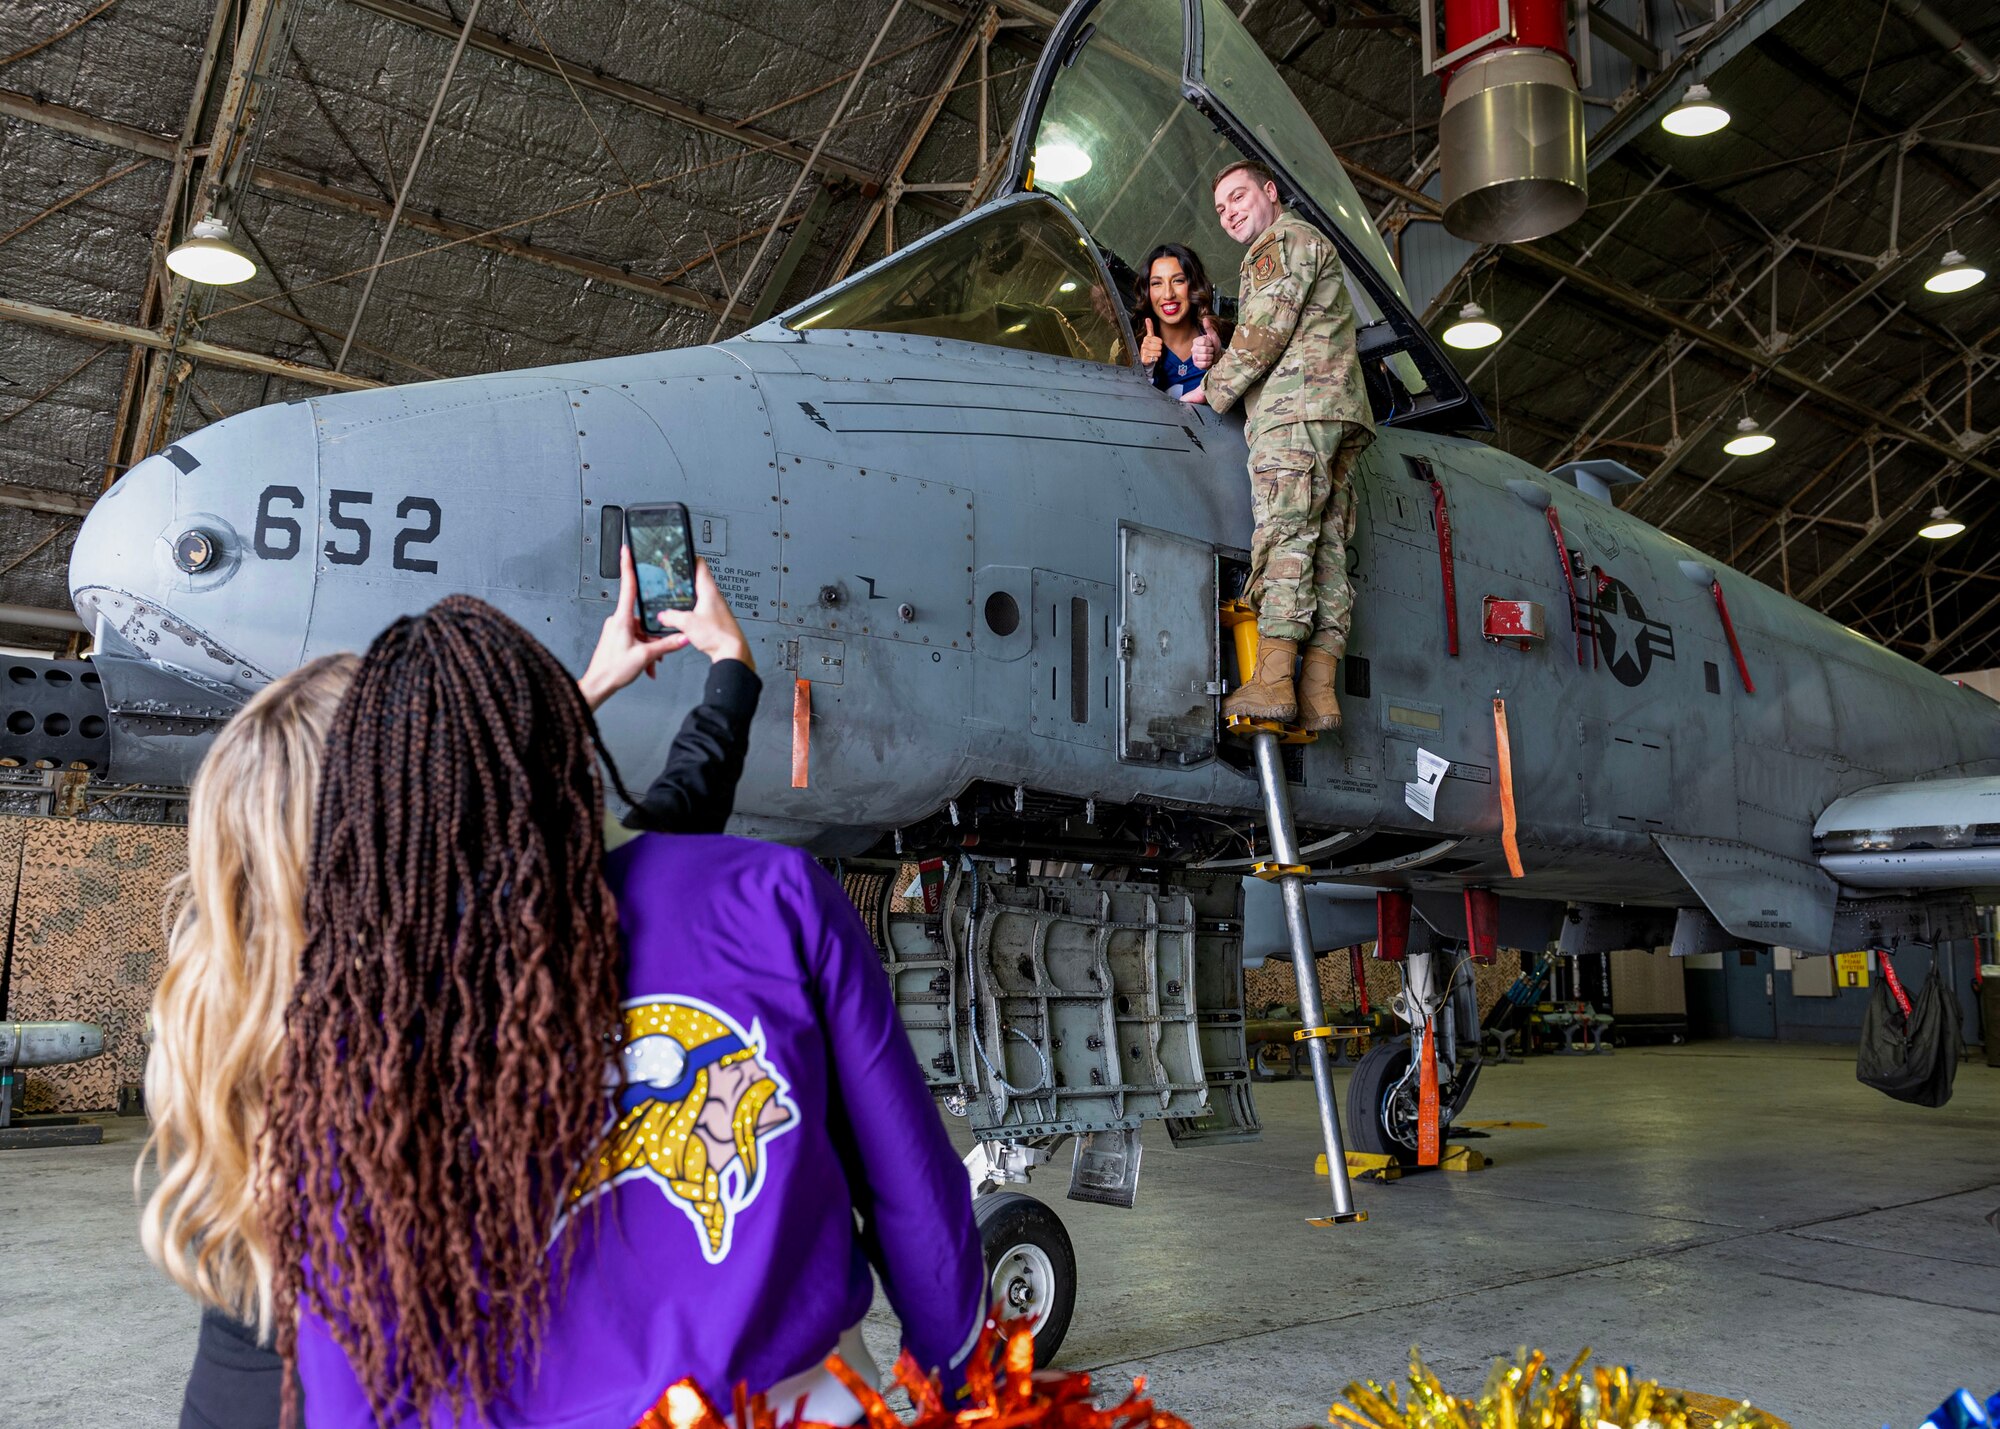 NFL cheerleaders, left, take a photo of U.S. Air Force Tech. Sgt. Ethan Halbert, 51st Maintenance Group loading standardization crew chief, and Kyleigh Creamer, an NFL cheerleader, during the Pro Blitz 2024 unit visit at Osan Air Base, Republic of Korea, Feb. 10, 2024. The NFL Pro Blitz is a week of events for military communities leading up to Super Bowl Sunday. (U.S. Air Force photo by Staff Sgt. Aubree Owens)